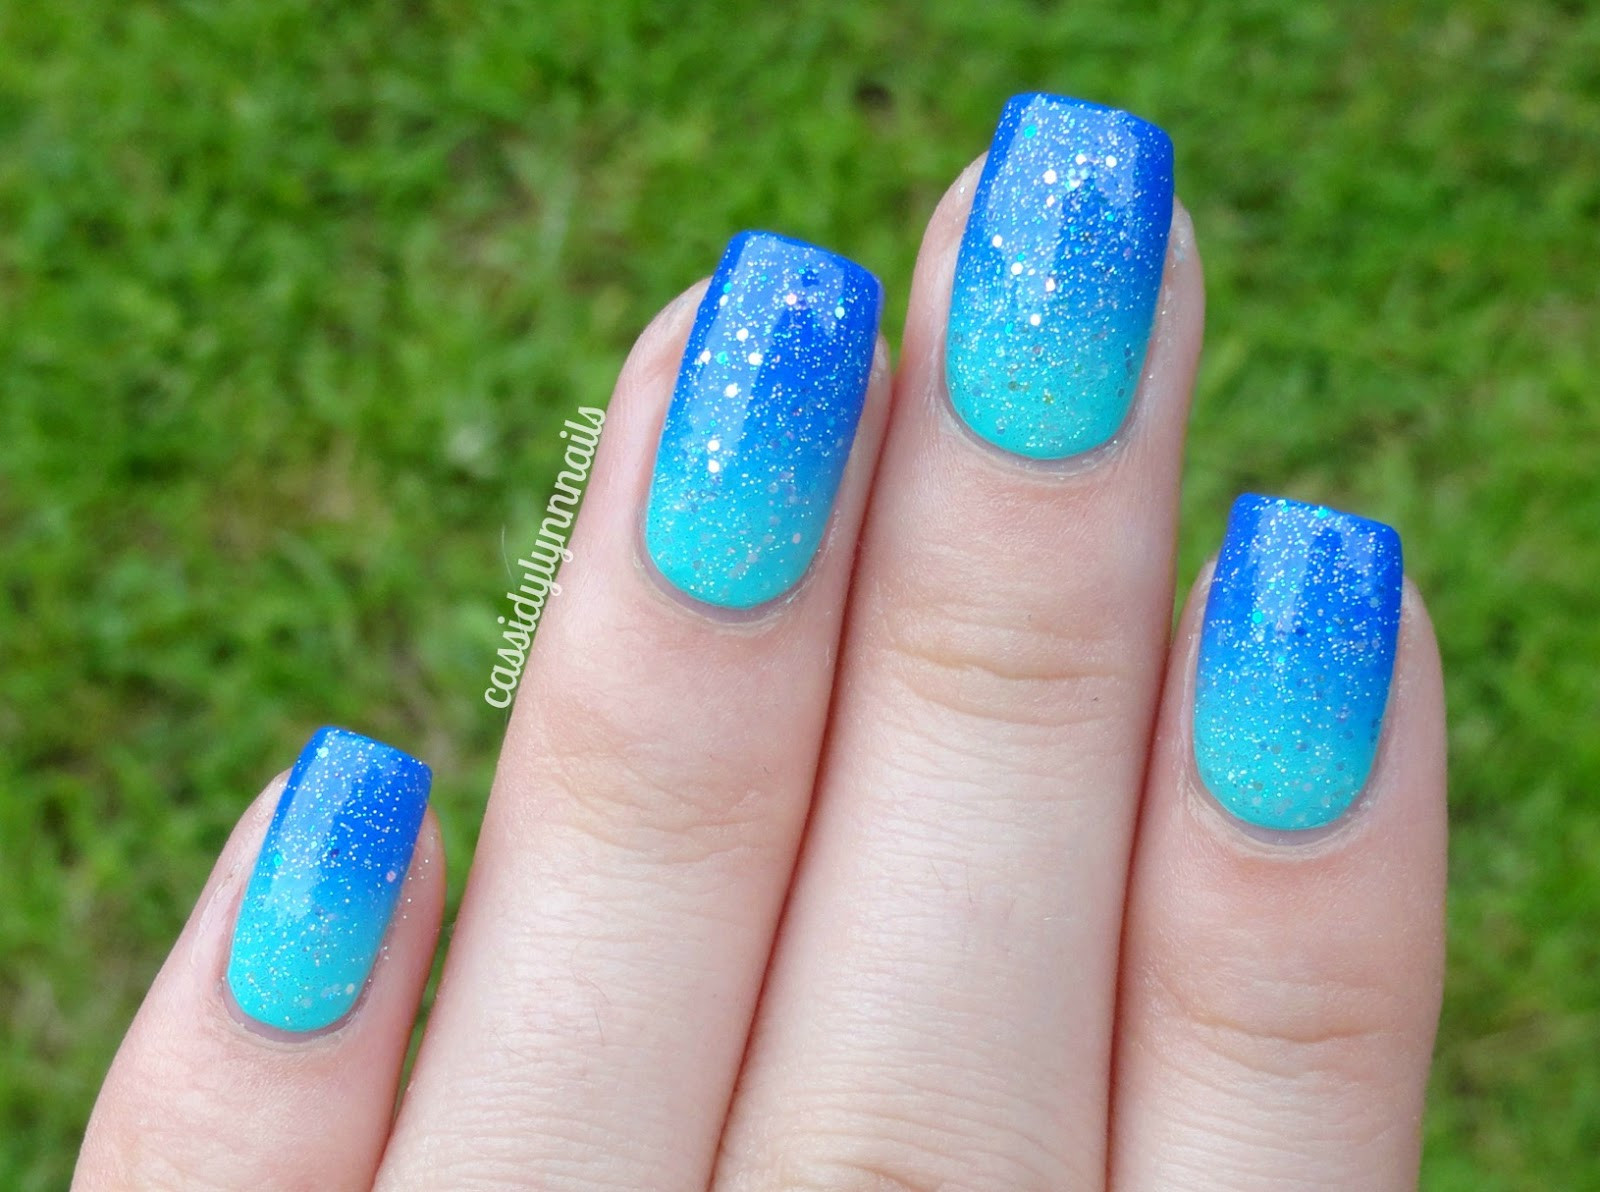 1. Ocean-themed nail art decals - wide 4